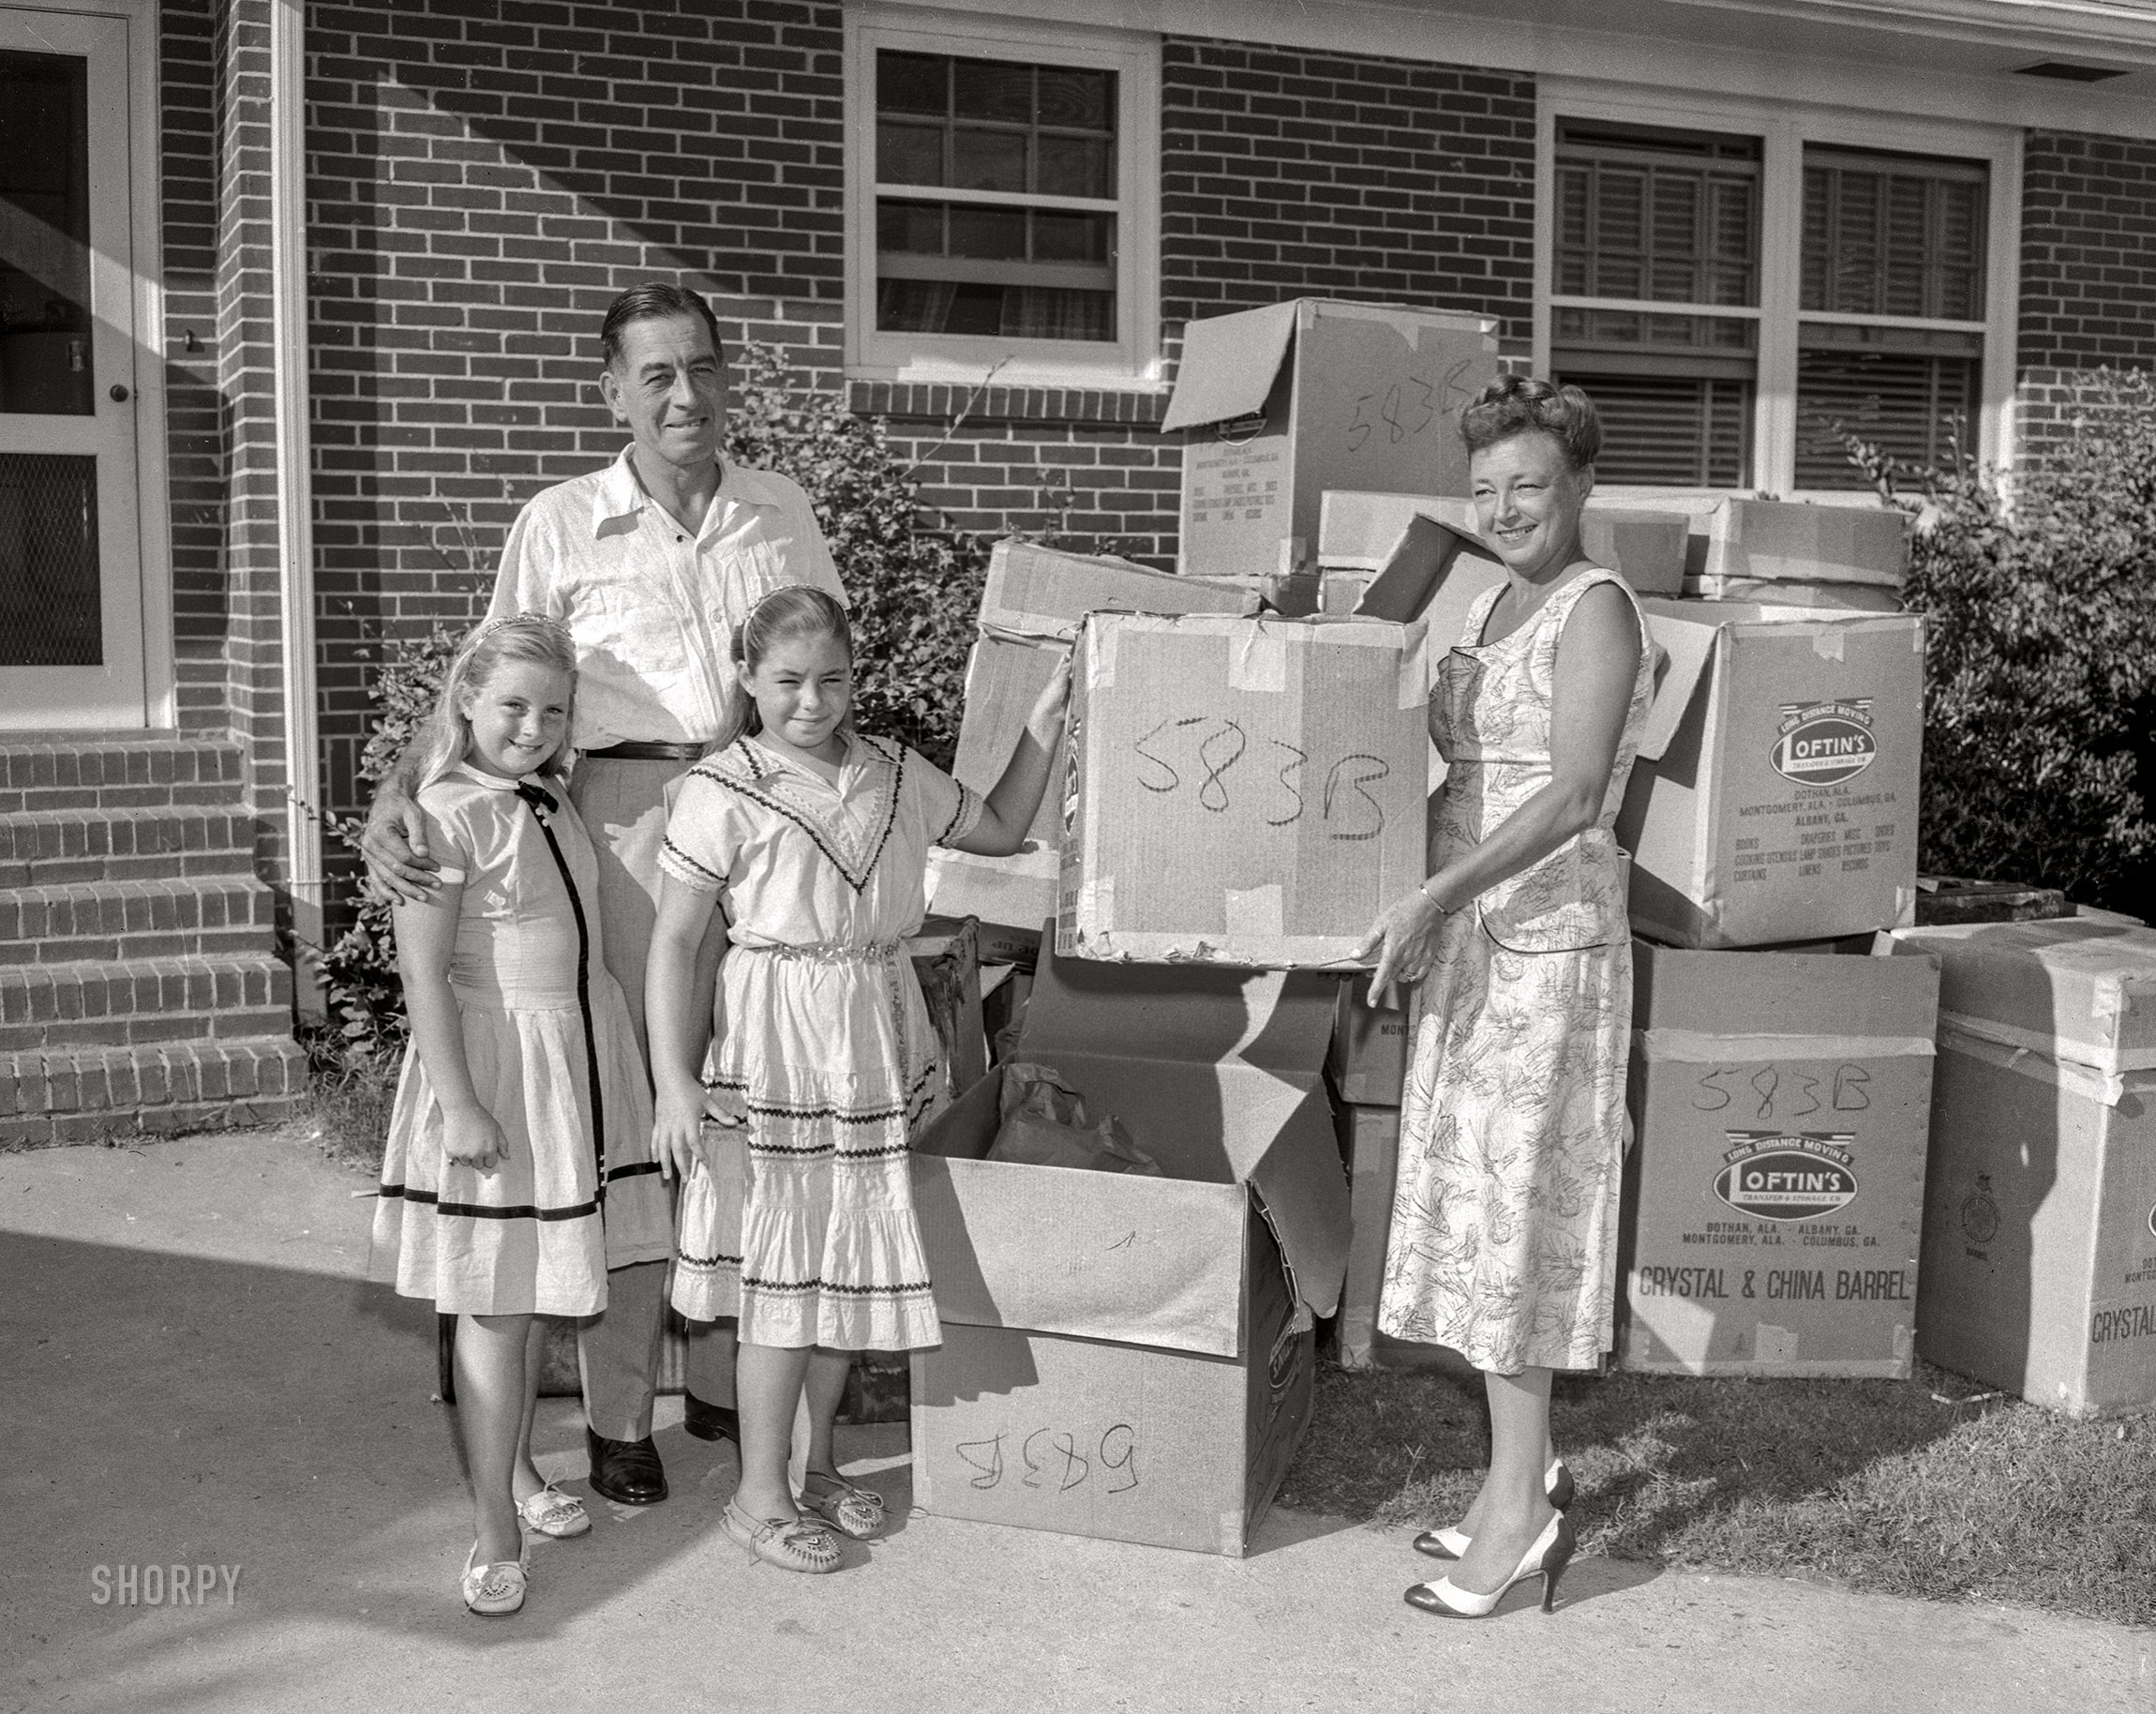 From Columbus, Georgia, circa 1957 comes this News Archive photo of a happy family on moving day. The twins are unpacked, and now all they have to do is find the box Junior is in. (This post brought to you by Loftin's Transfer & Storage.) 4x5 acetate negative. View full size.